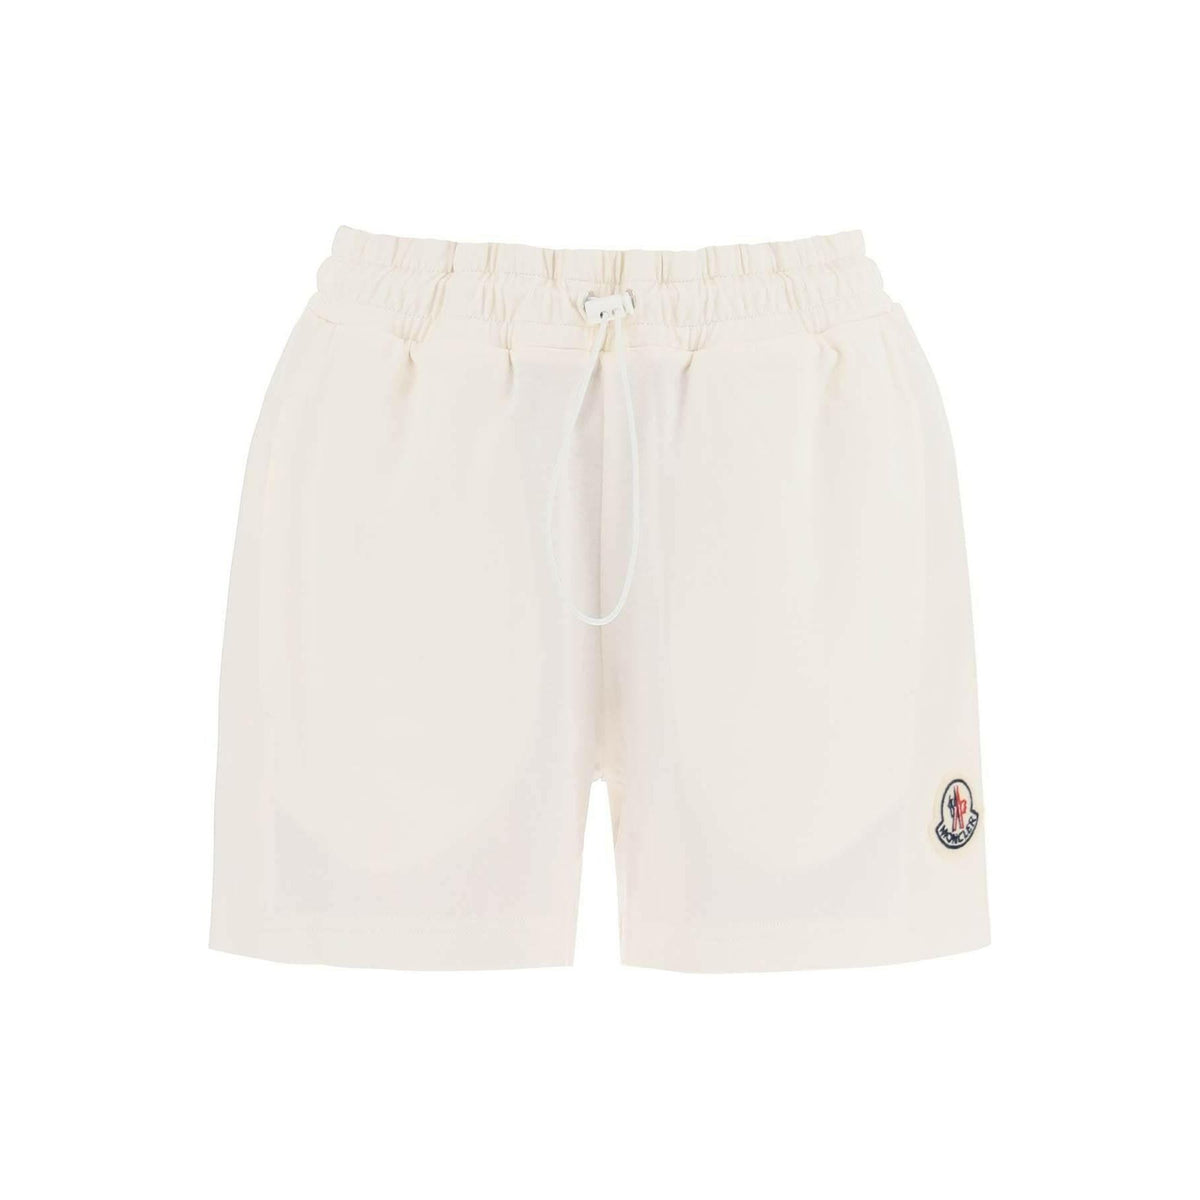 MONCLER - White Relaxed Fit Jersey Shorts with Poplin Inserts - JOHN JULIA